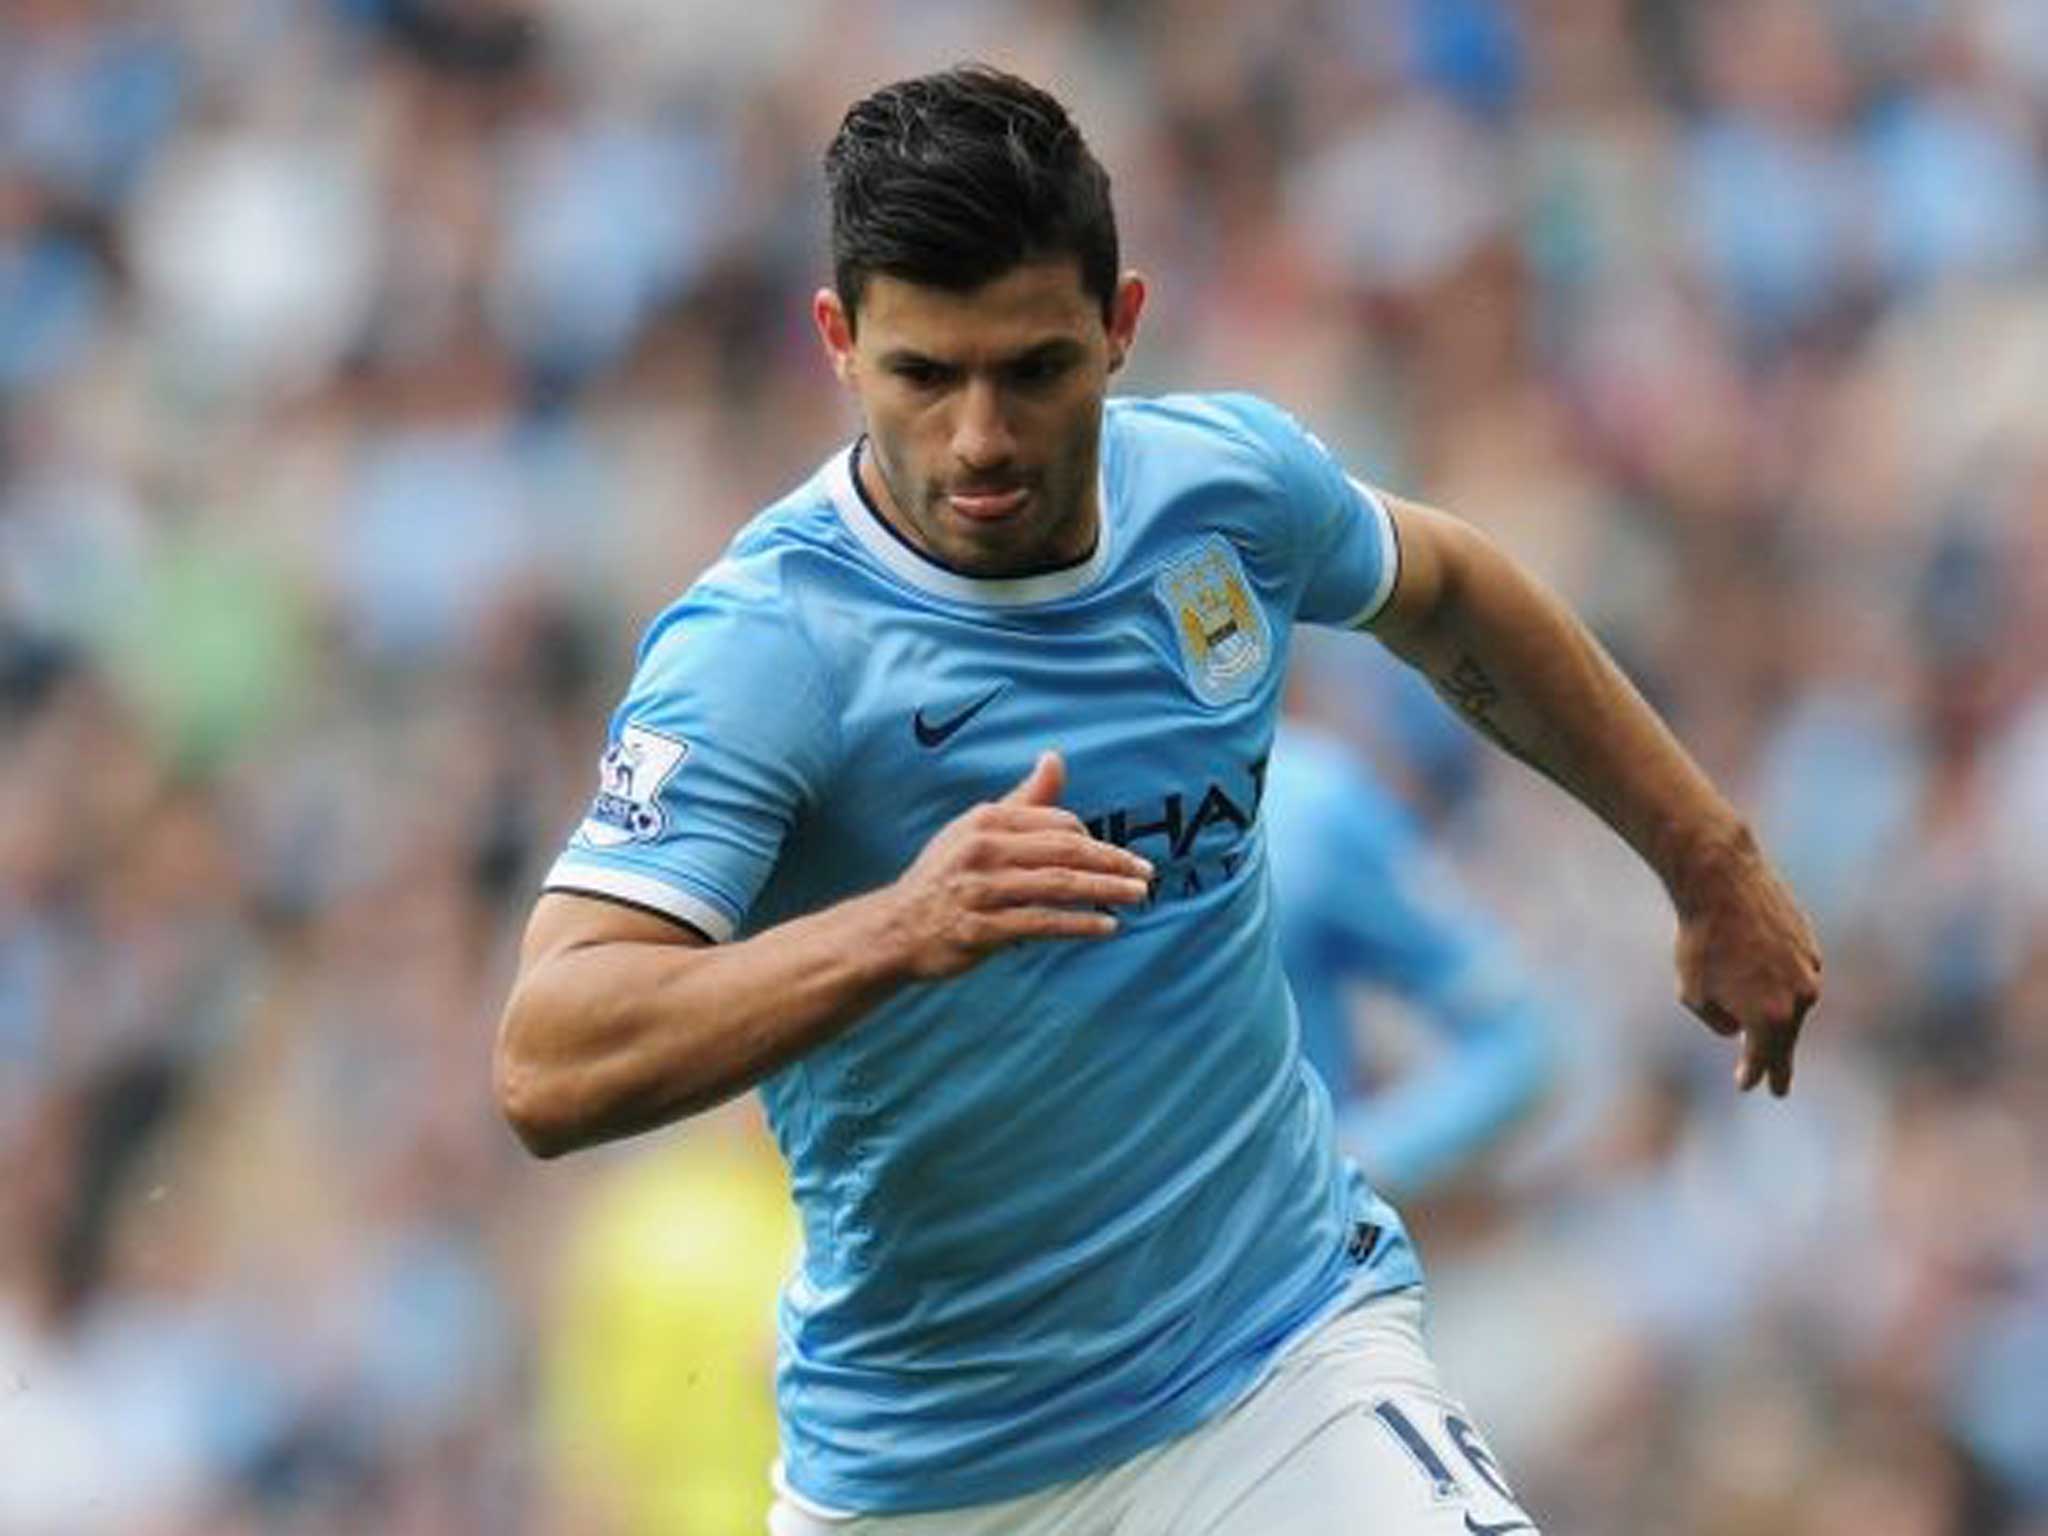 Will last minute heroics from Aguero be needed again?